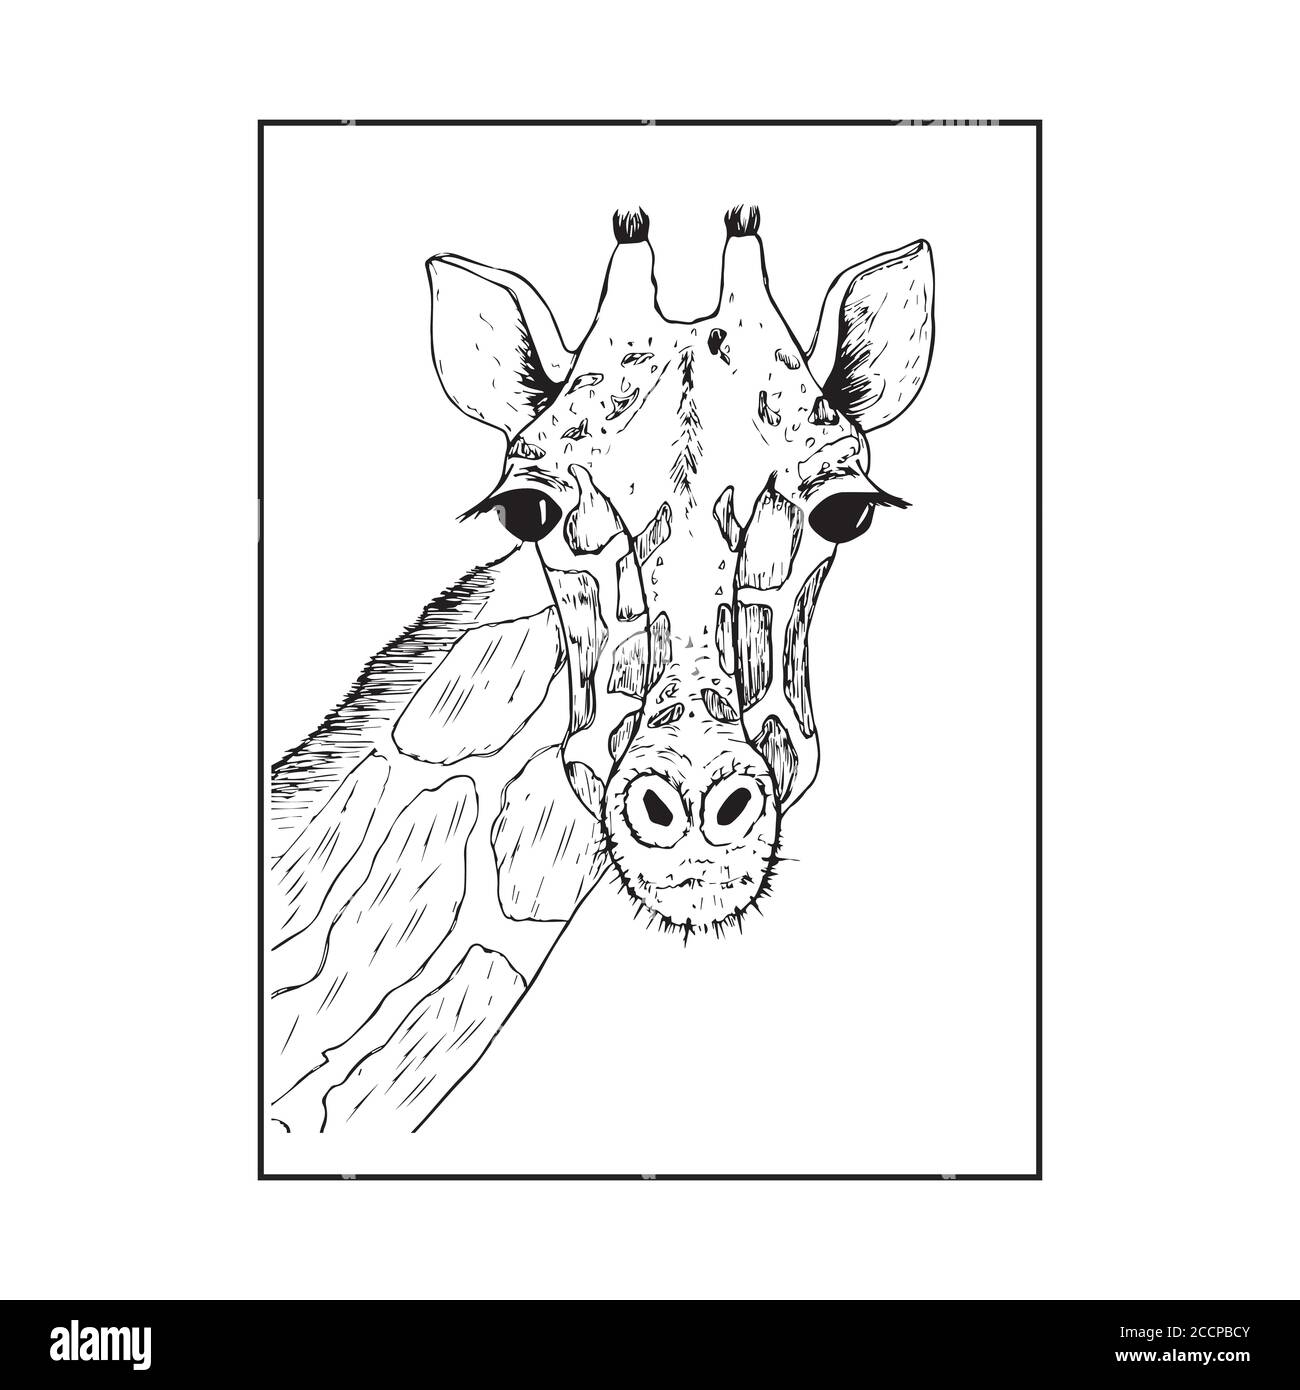 the head of a giraffe sketch vector graphics black and white drawing Stock Vector